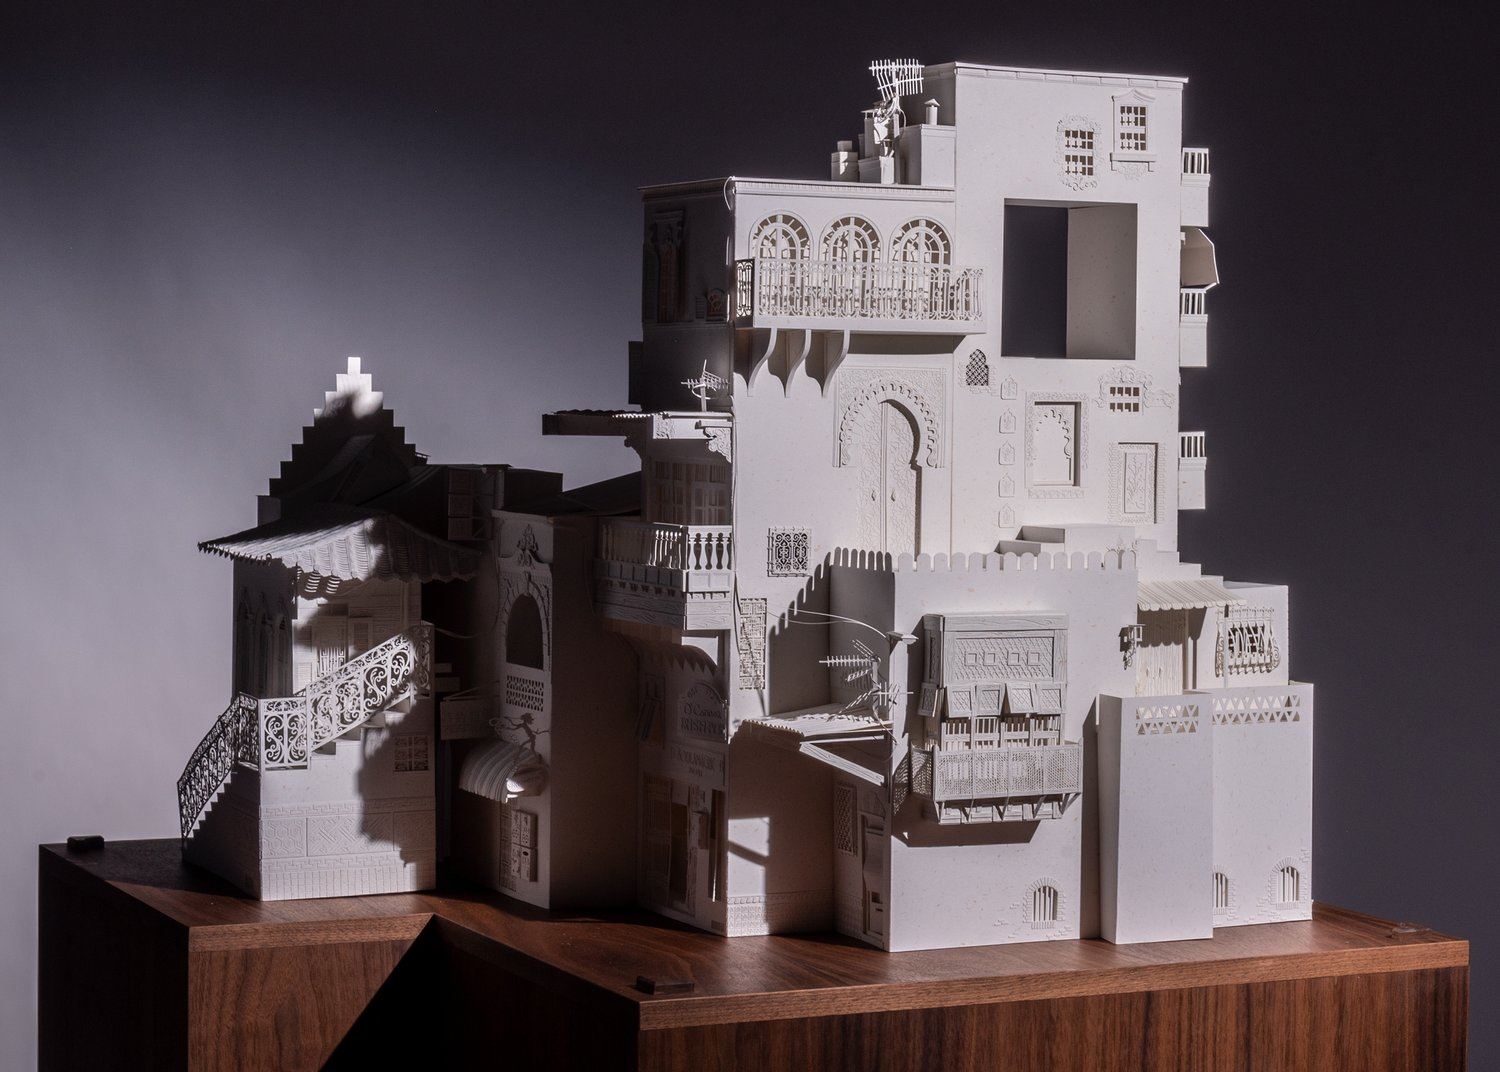 An architectural sculpture made of paper.